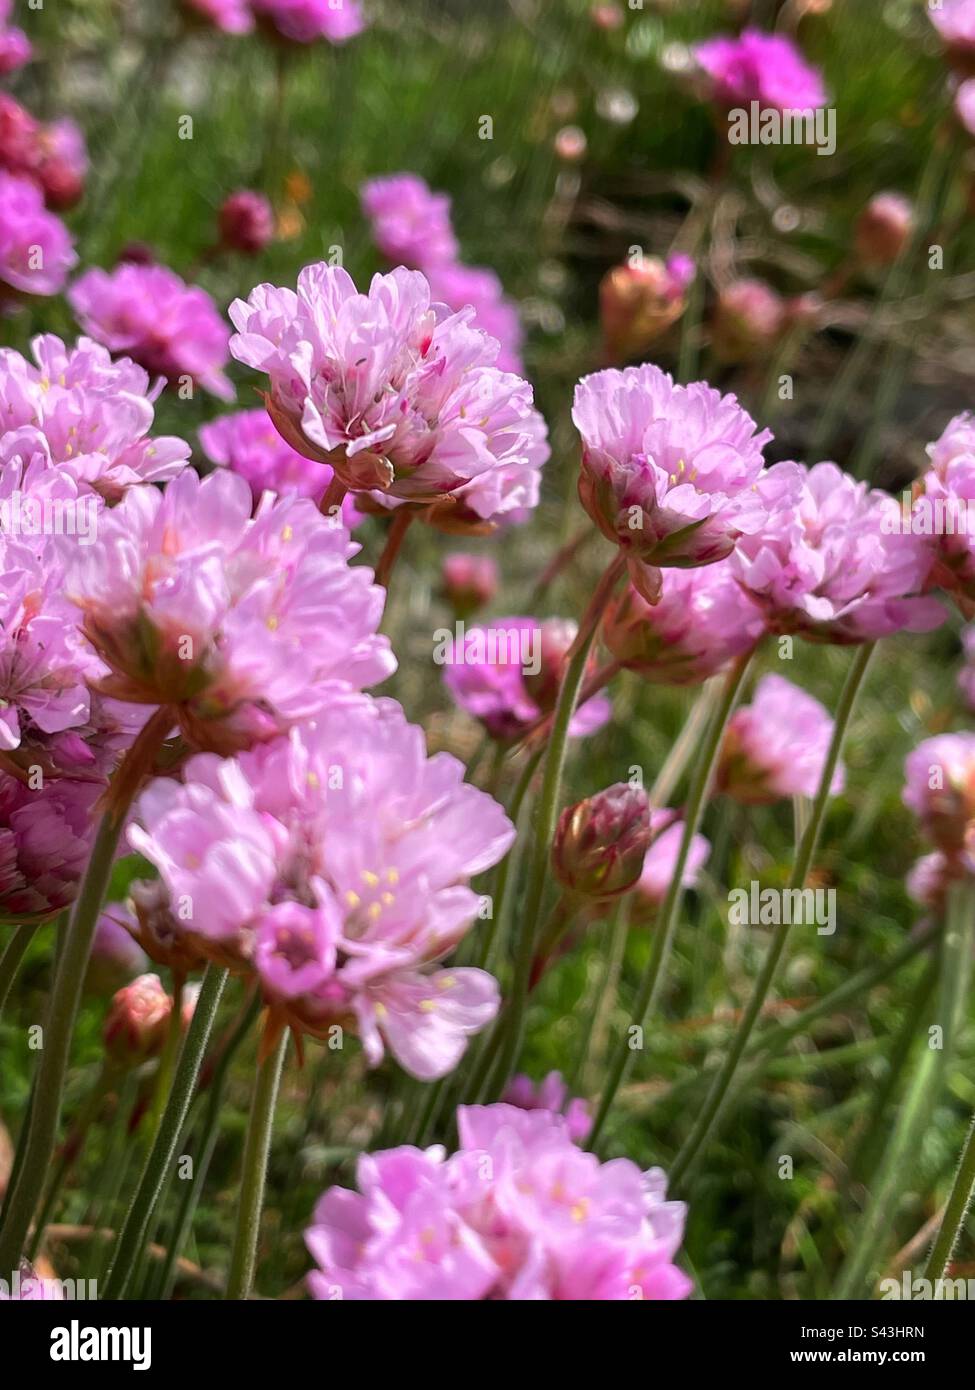 Sea pinks or thrift, Armeria maritima growing on a cliff side in Pembrokeshire, West Wales, mid April. Stock Photo